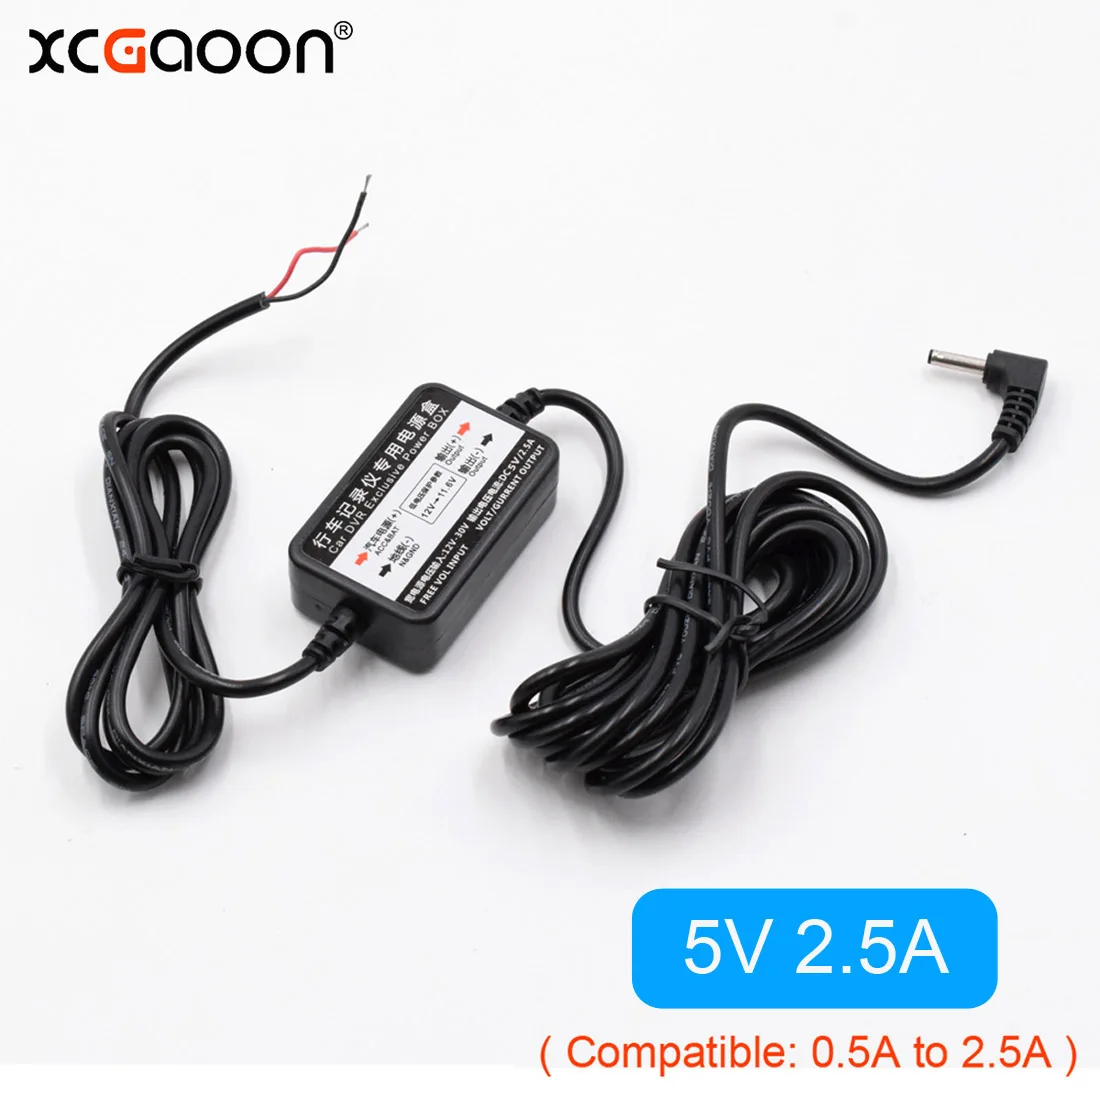 

XCGaoon Car Charger DC Converter Module 12V 24V To 5V 2.5A with 3.5mm Port fit Radar Detector DVR Camera, Cable Length 3.1m